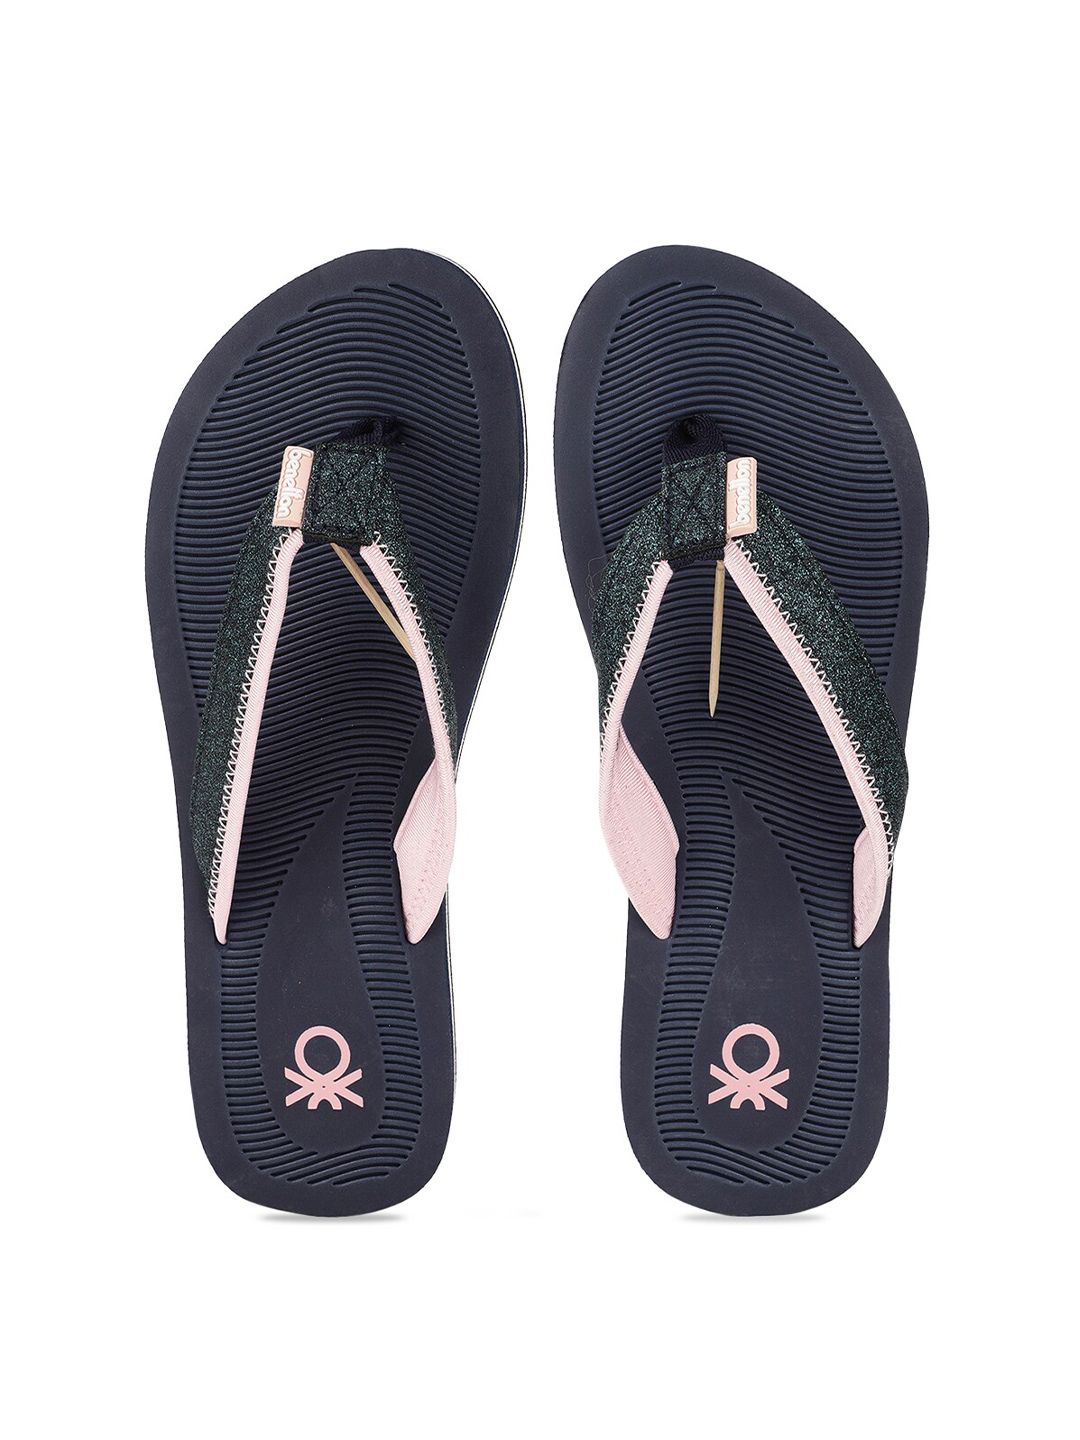 United Colors of Benetton Women Navy Blue & Pink Rubber Thong Flip-Flops Price in India